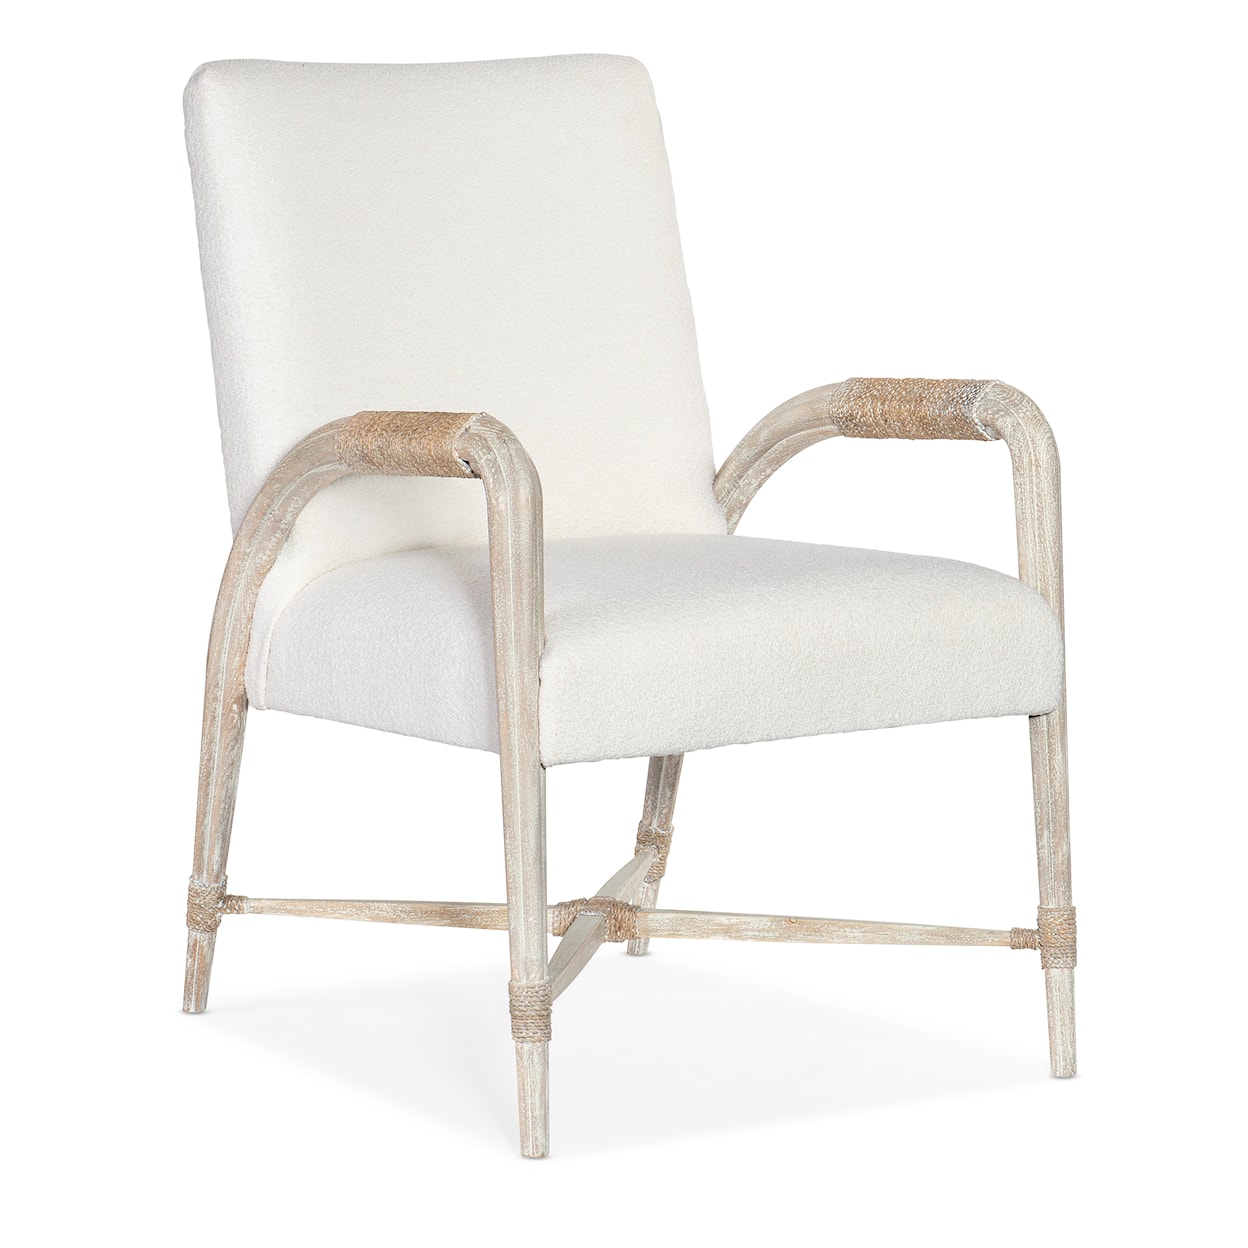 Hooker Furniture Serenity Upholstered Arm Chair